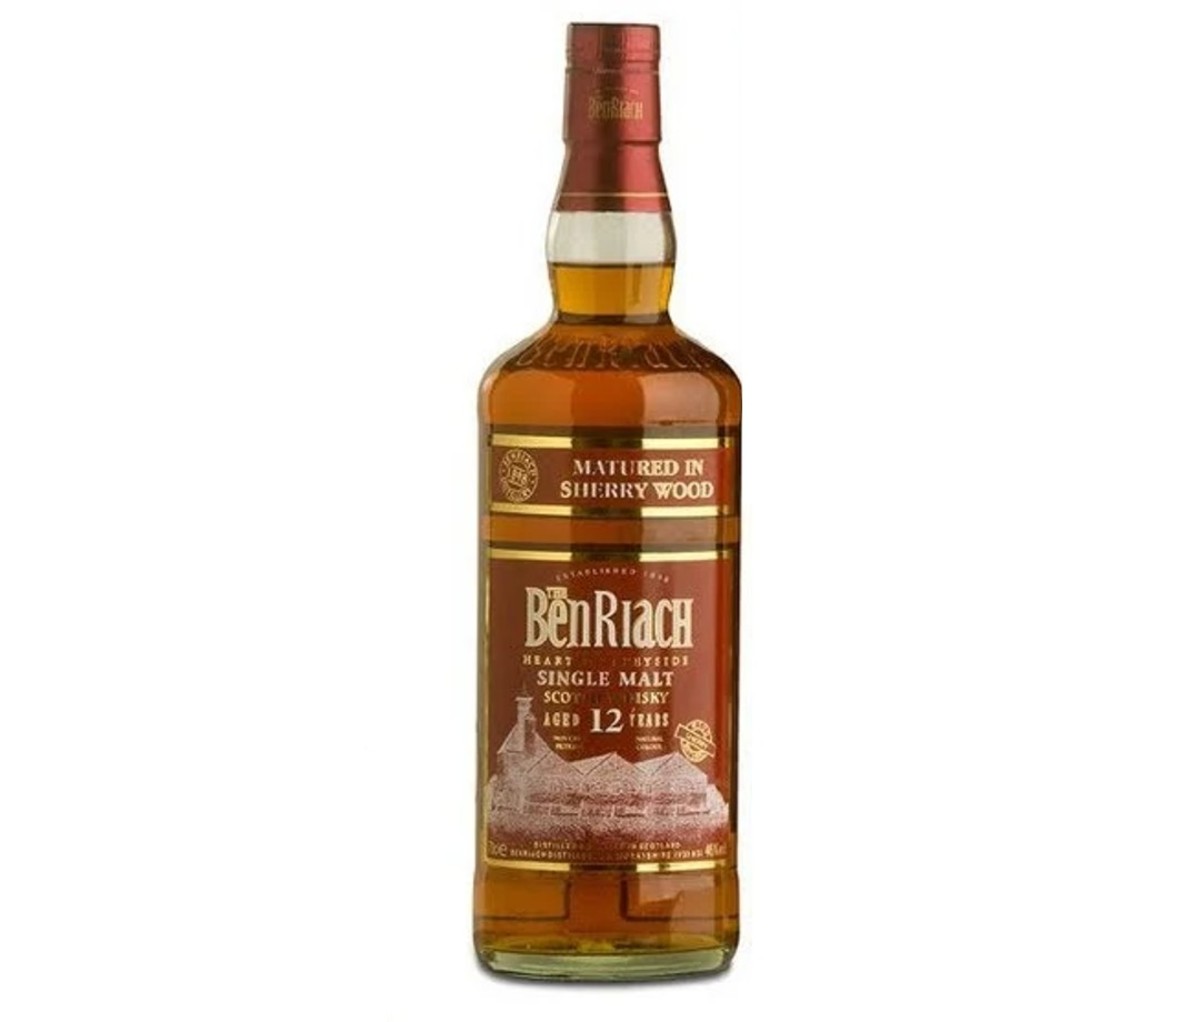 A bottle of Benriach Sherry Wood Matured 12 Year